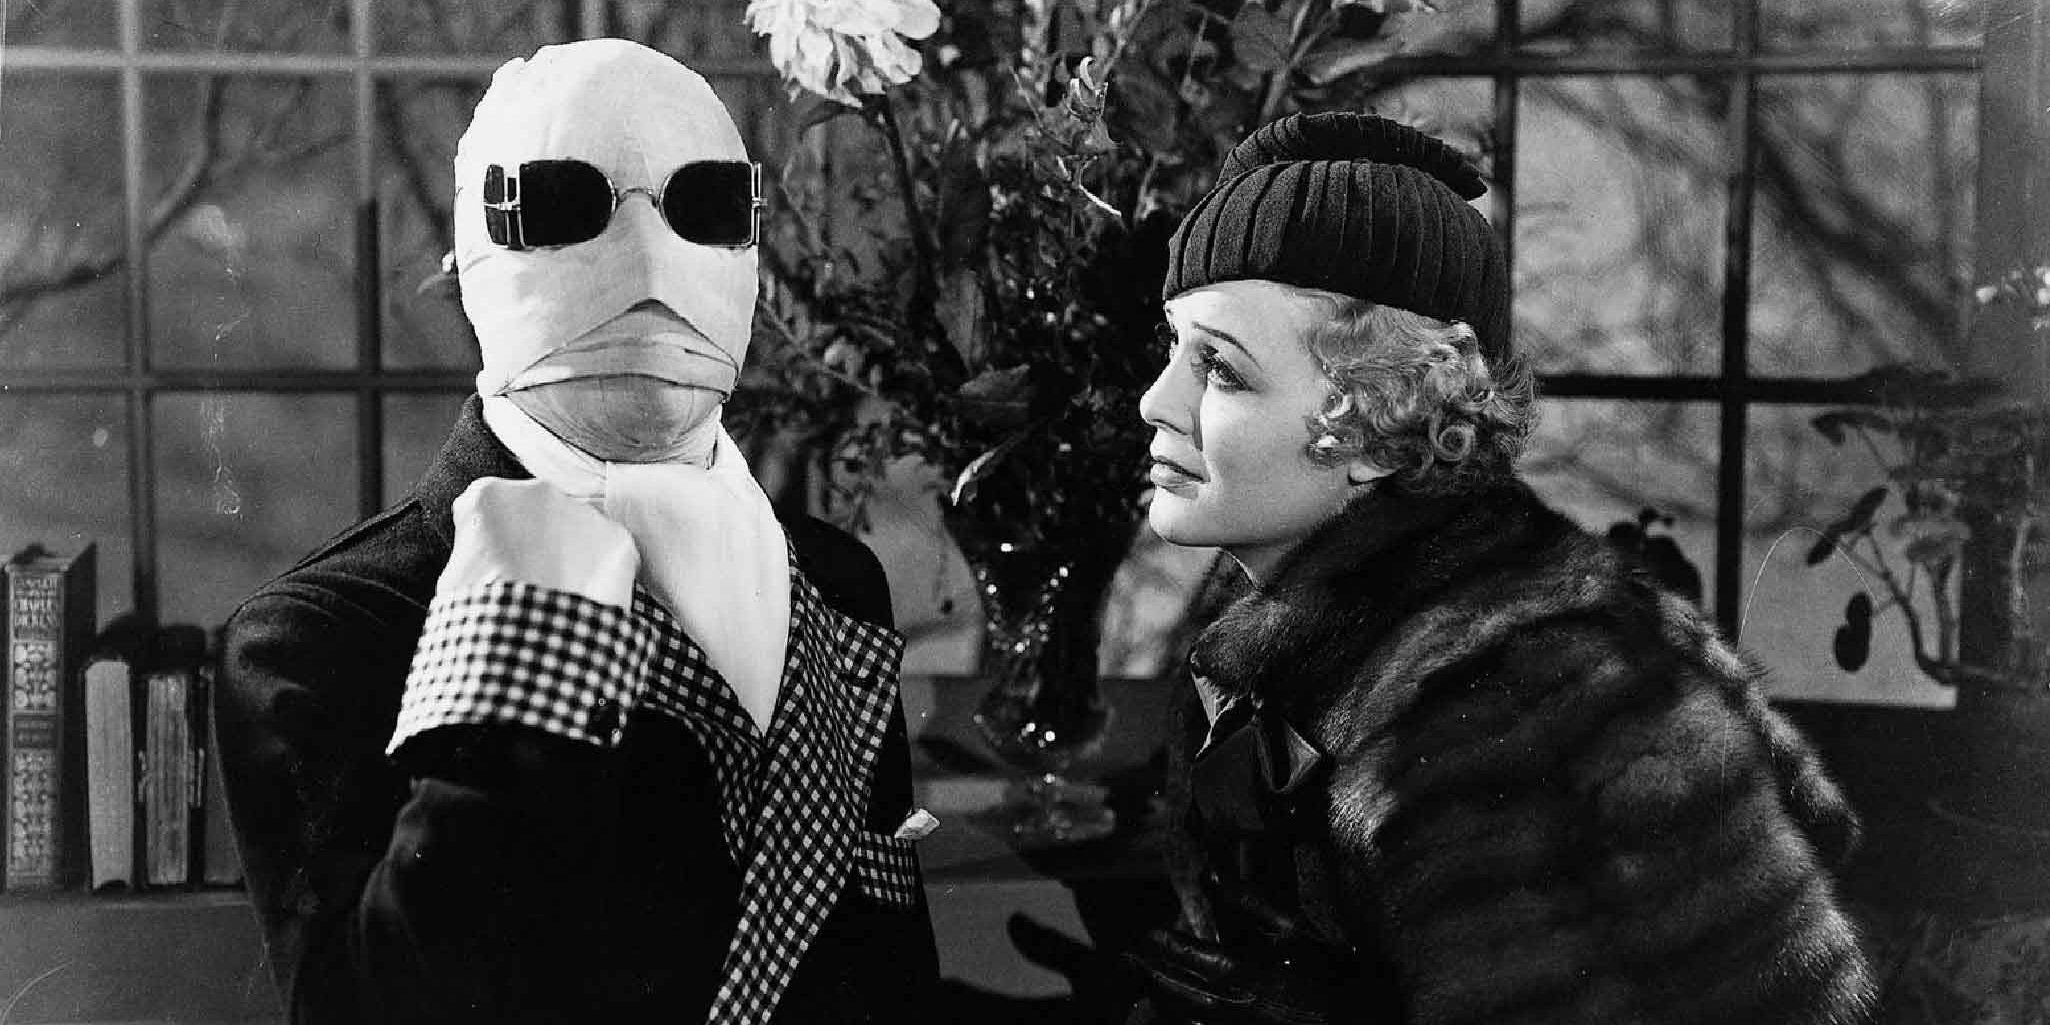 Blumhouse’s Invisible Man Reboot Gets 2020 Release Date